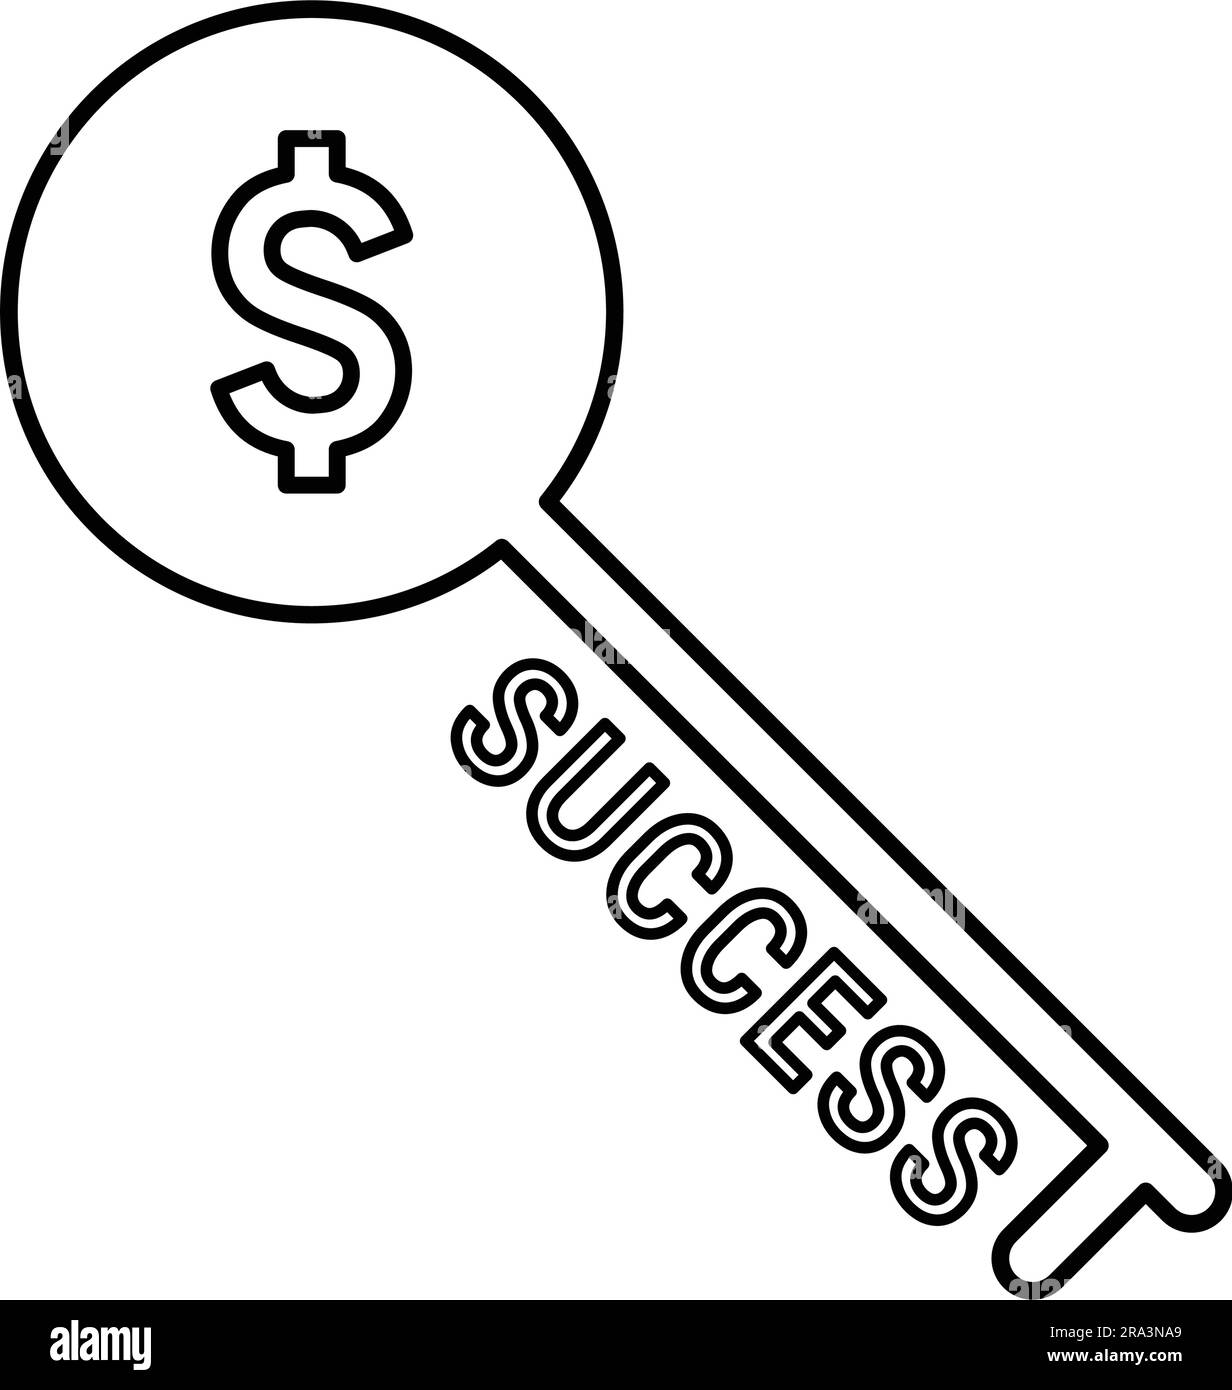 Business Success Key icon. Fully editable vector EPS use for printed materials and infographics, web or any kind of design project. Stock Vector